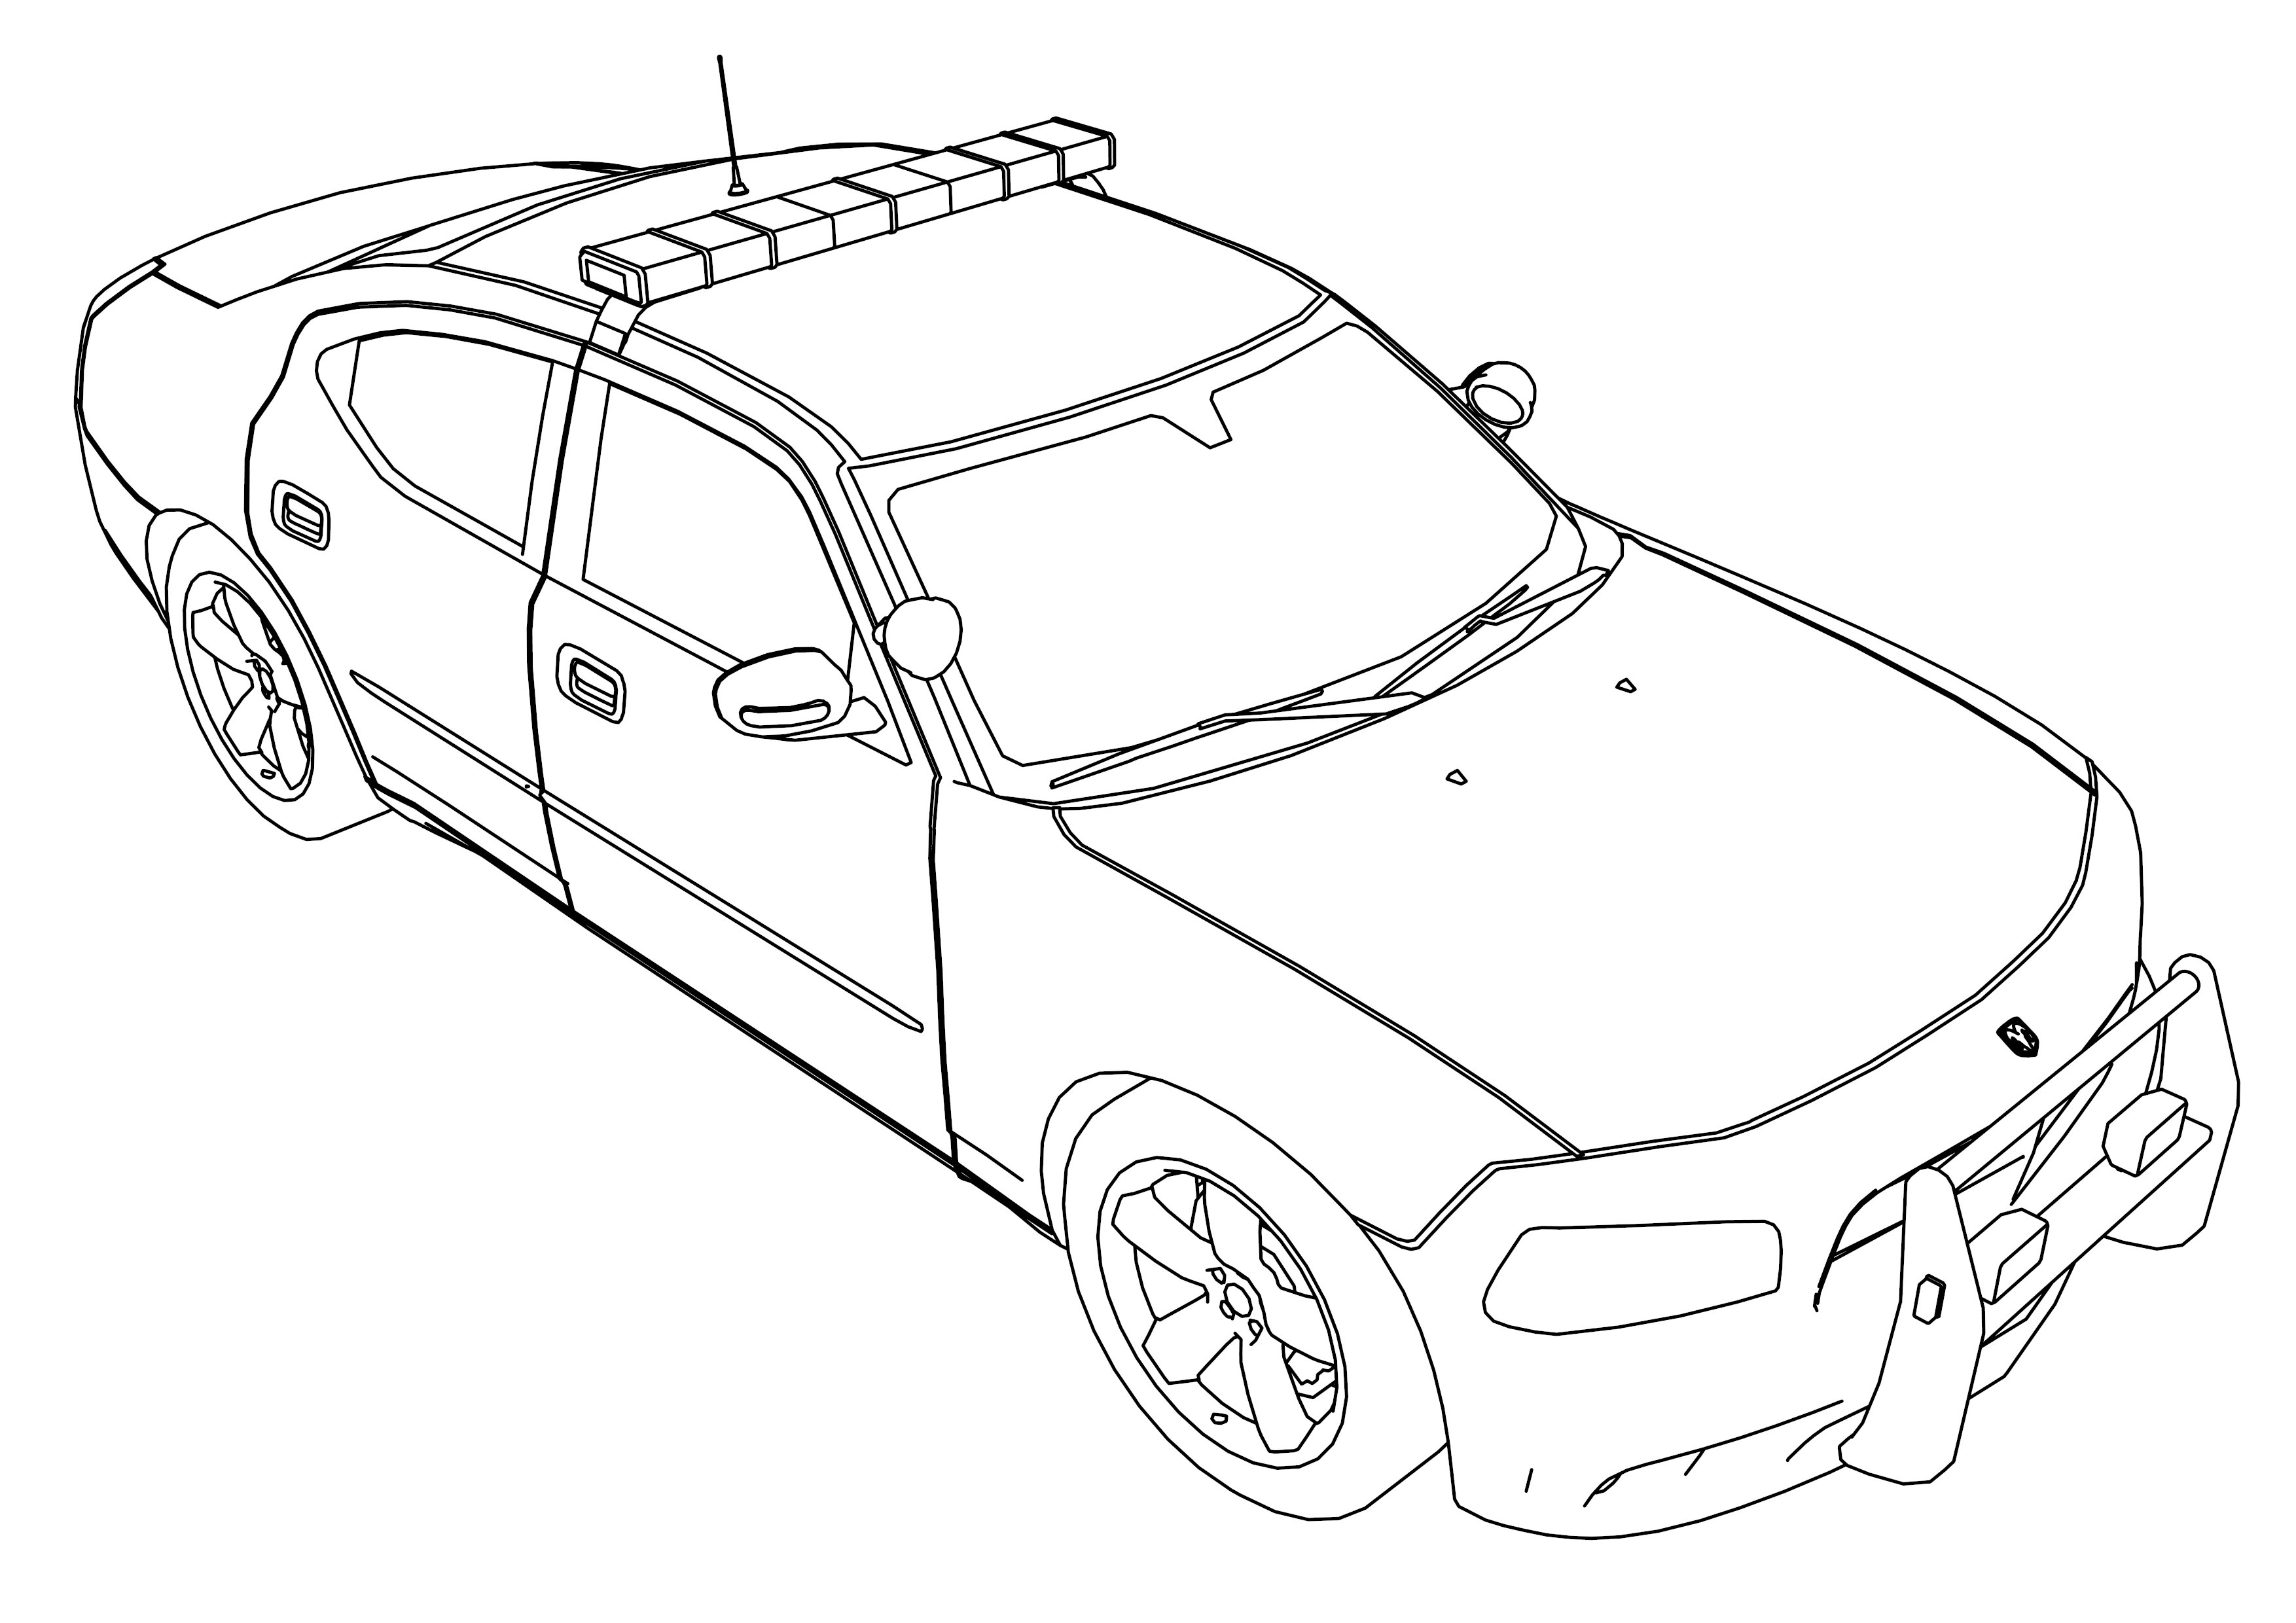 Dodge Challenger Coloring Pages at GetColorings.com | Free printable